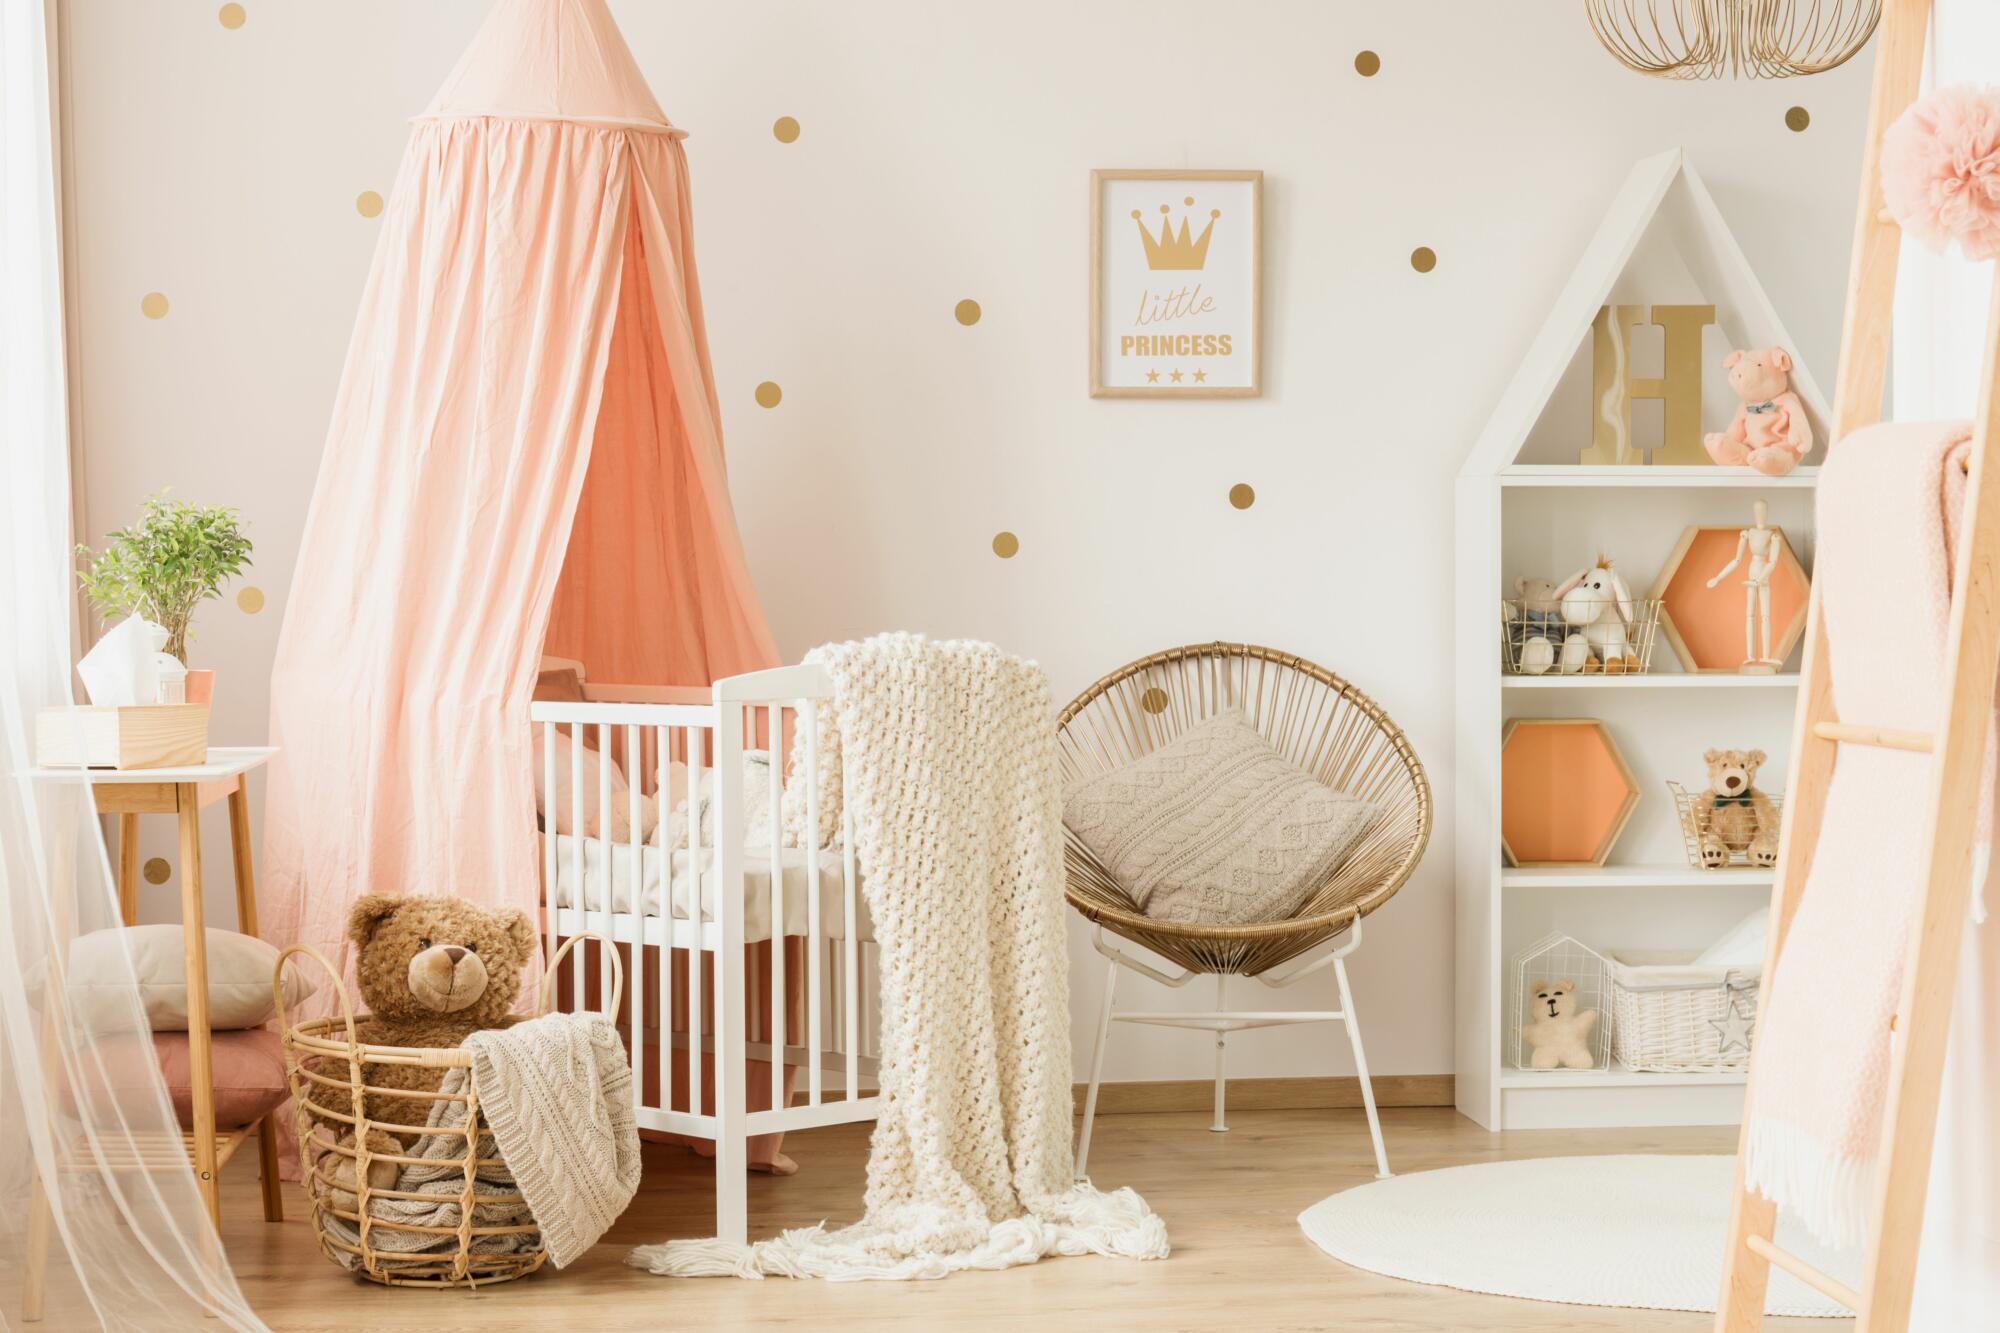 Nursery Decor Ideas: A pink and white baby room with a canopy and a teddy bear.